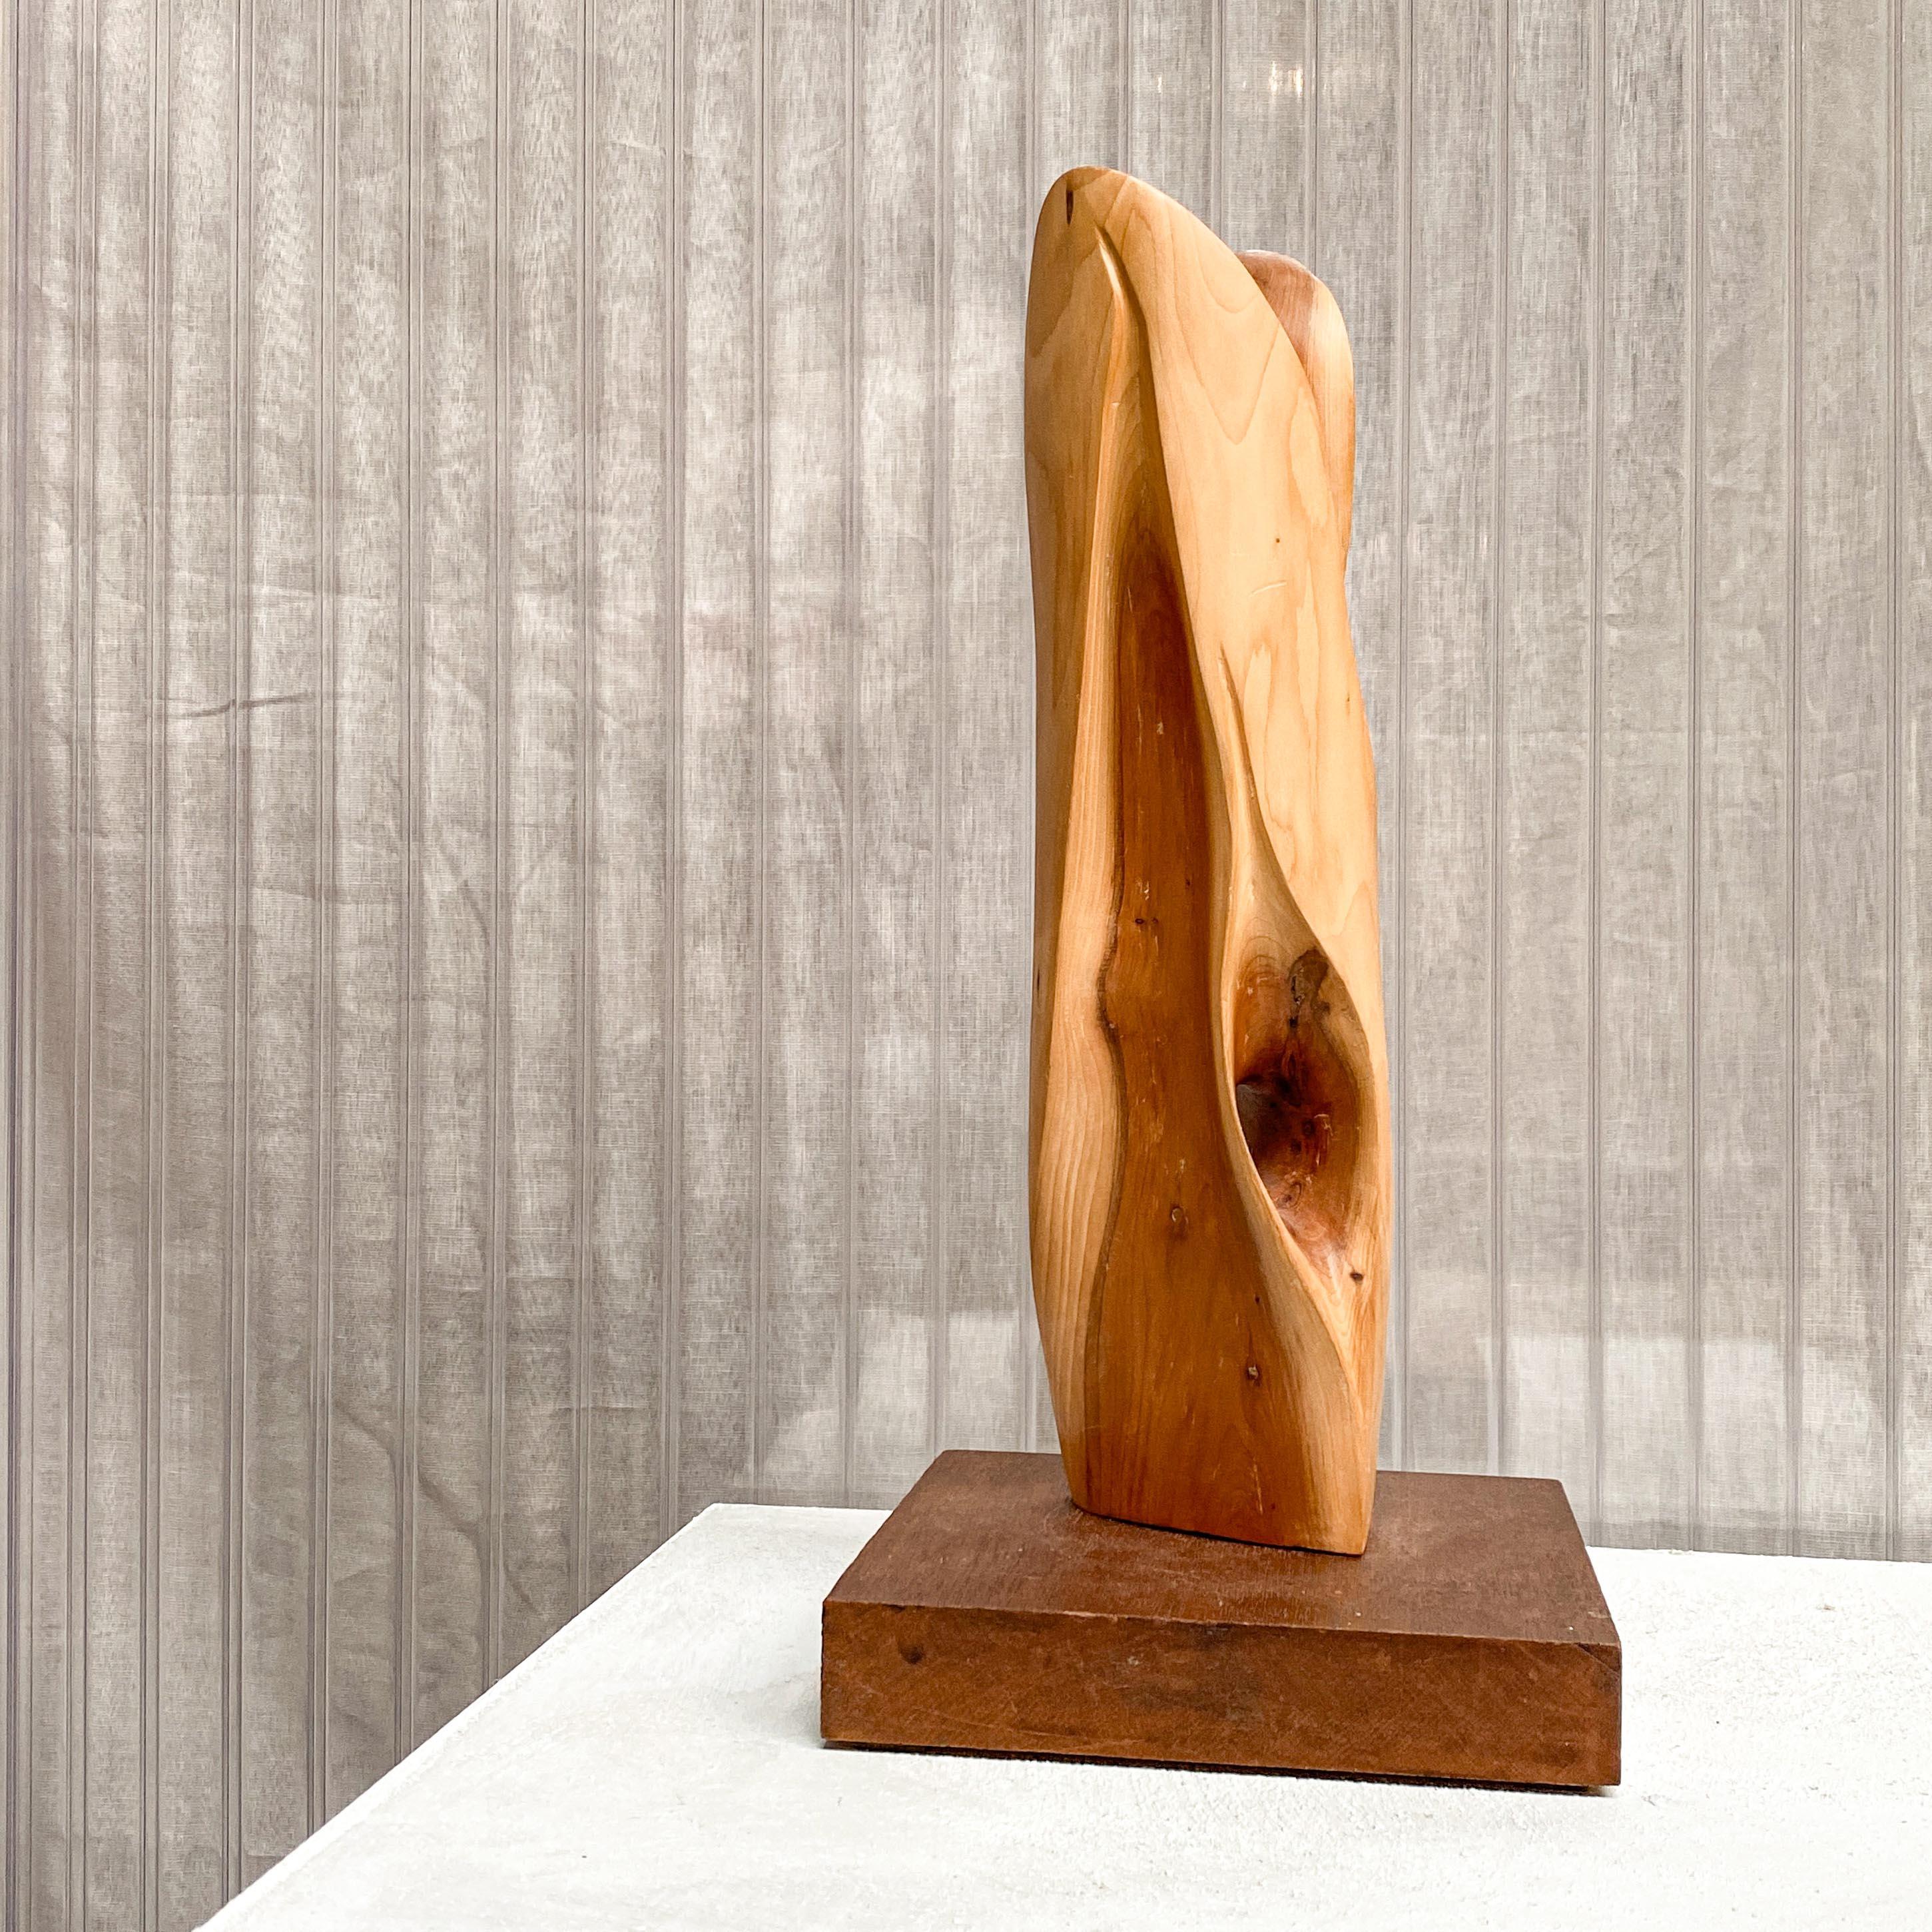 Modernist Wooden Sculpture in Abstract Intricate TOTEM Shape on a Wooden Base For Sale 4